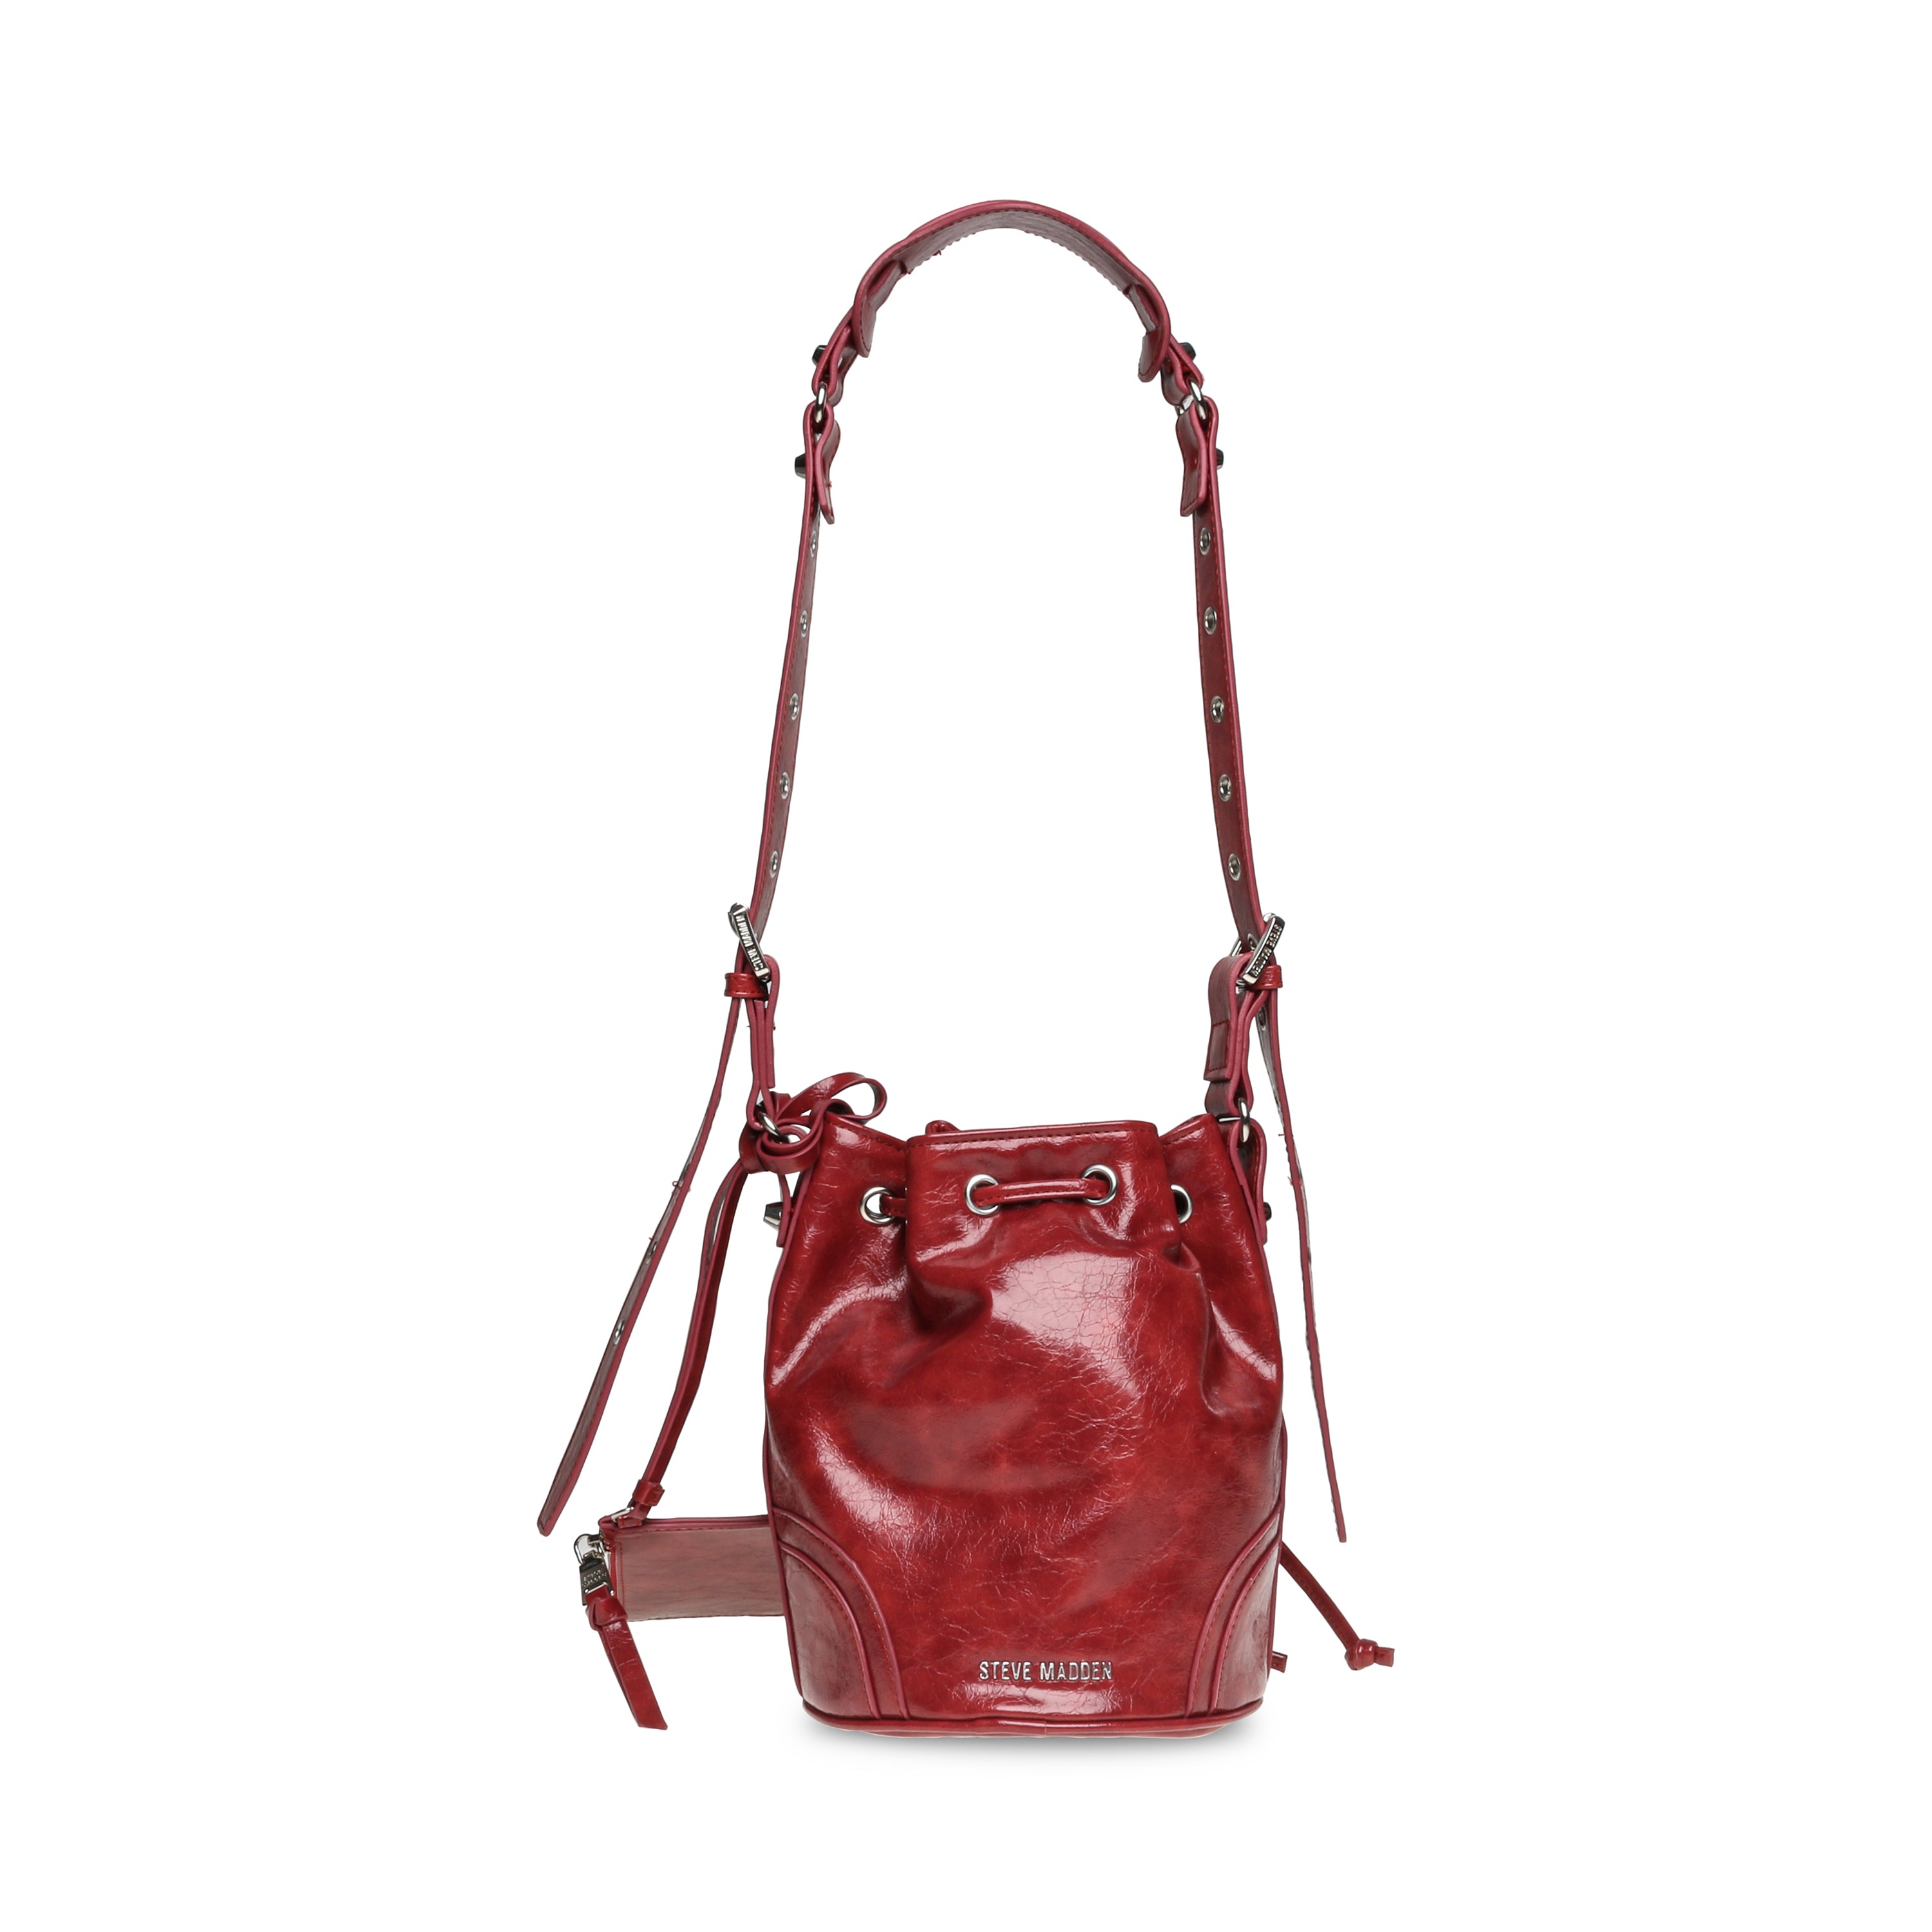 BVALLY RED BUCKET BAG